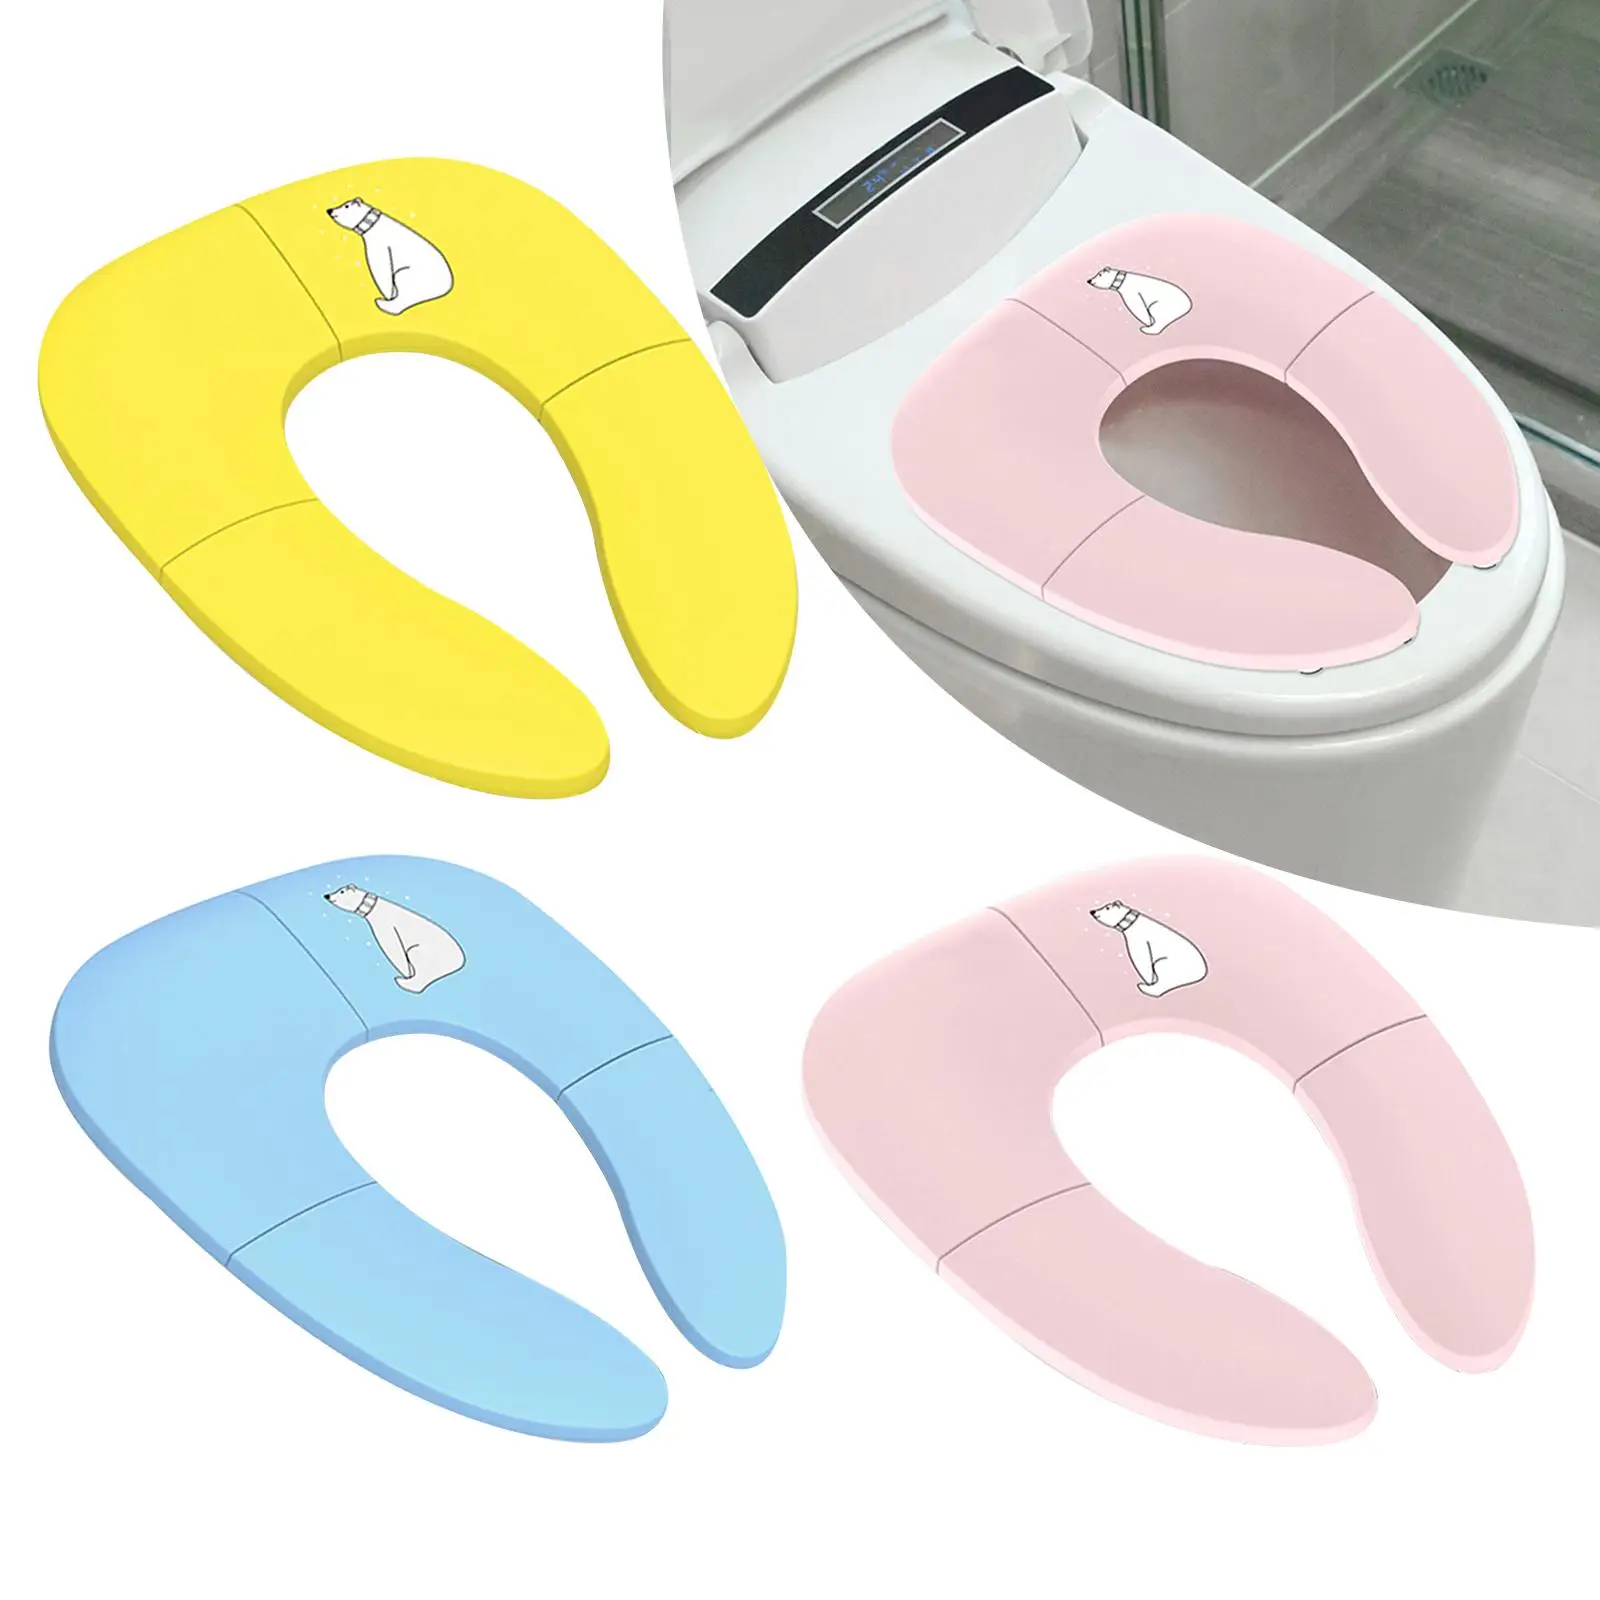 Folding Toilet Cushion training Seat Reusable Portable Toilet Ring Toilet Seat pad Toilet Cover for Home Use